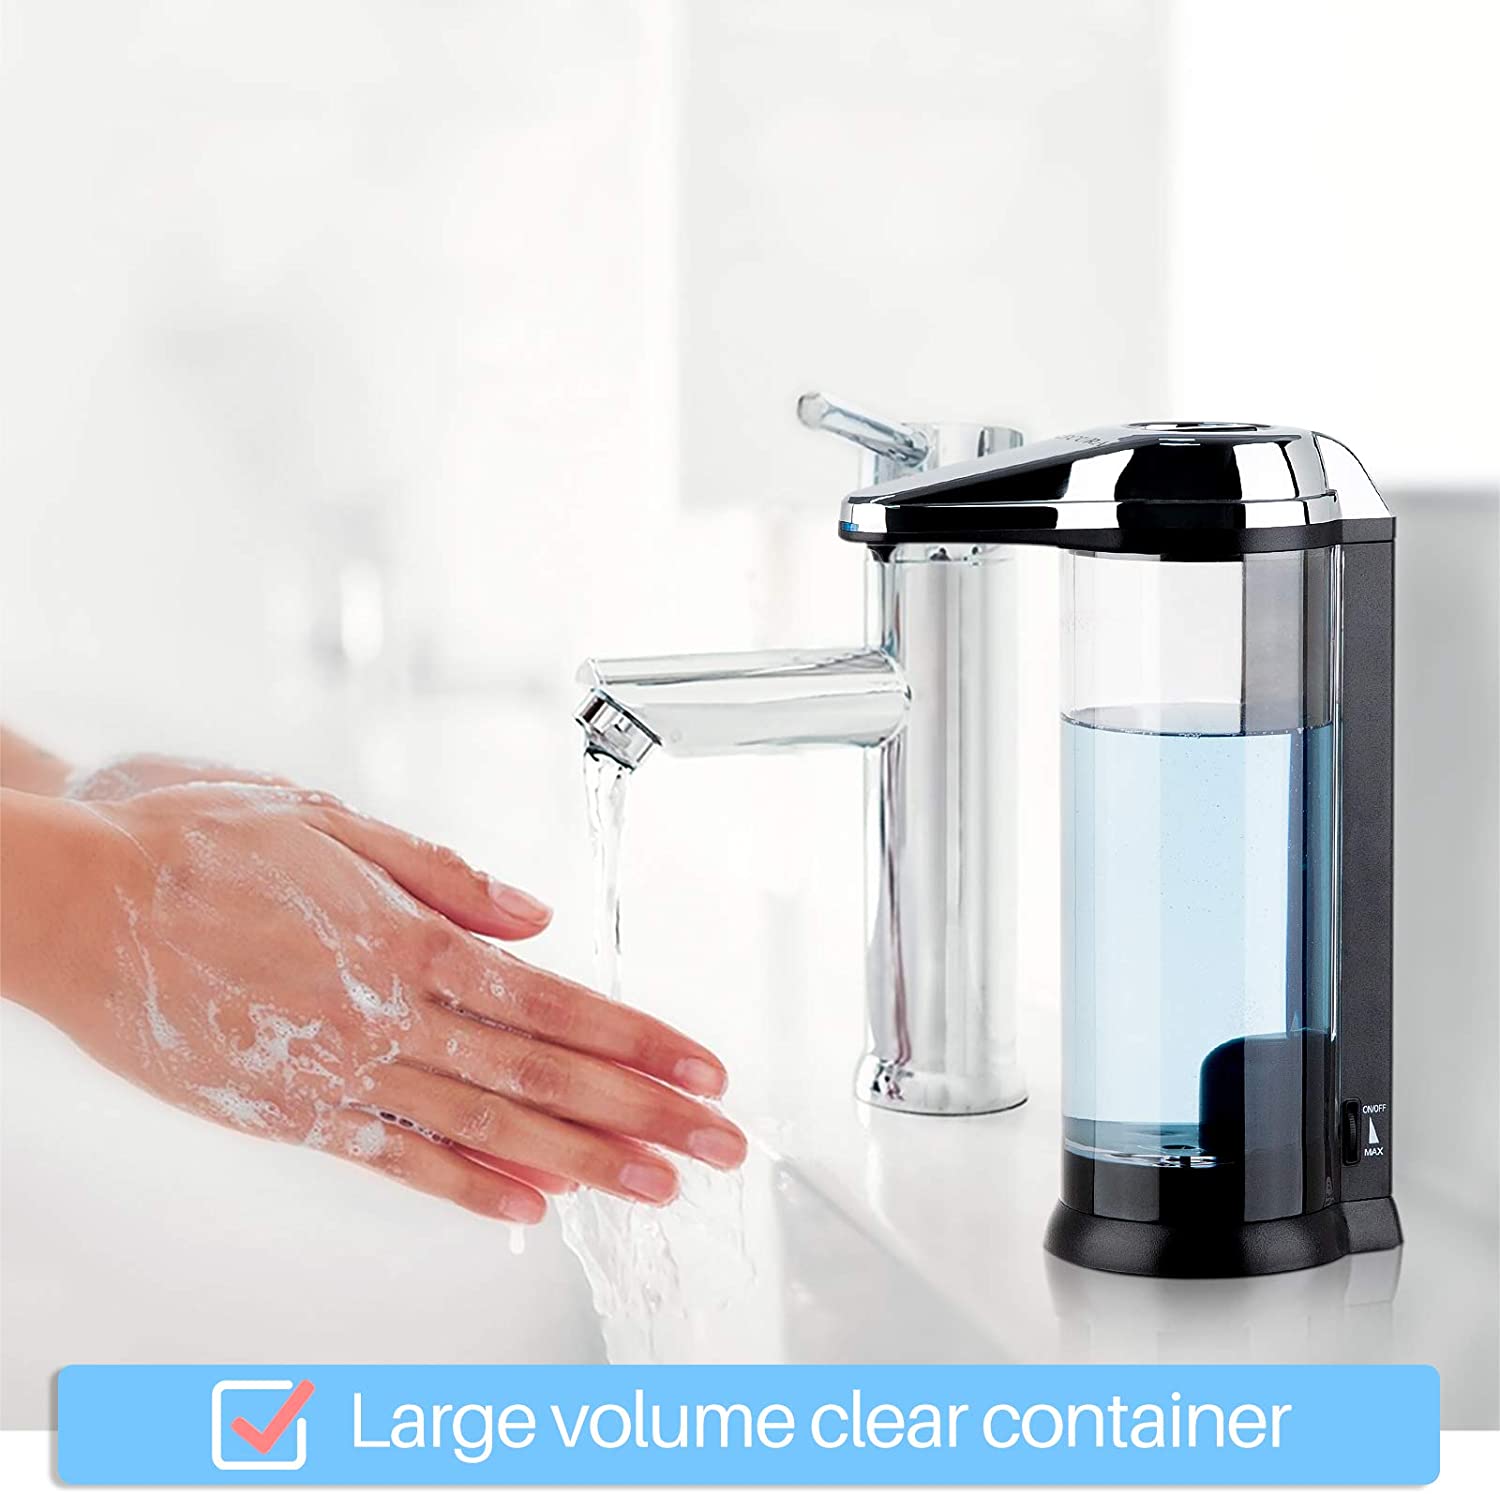 Why Is My Touchless Soap Dispenser Not Working?